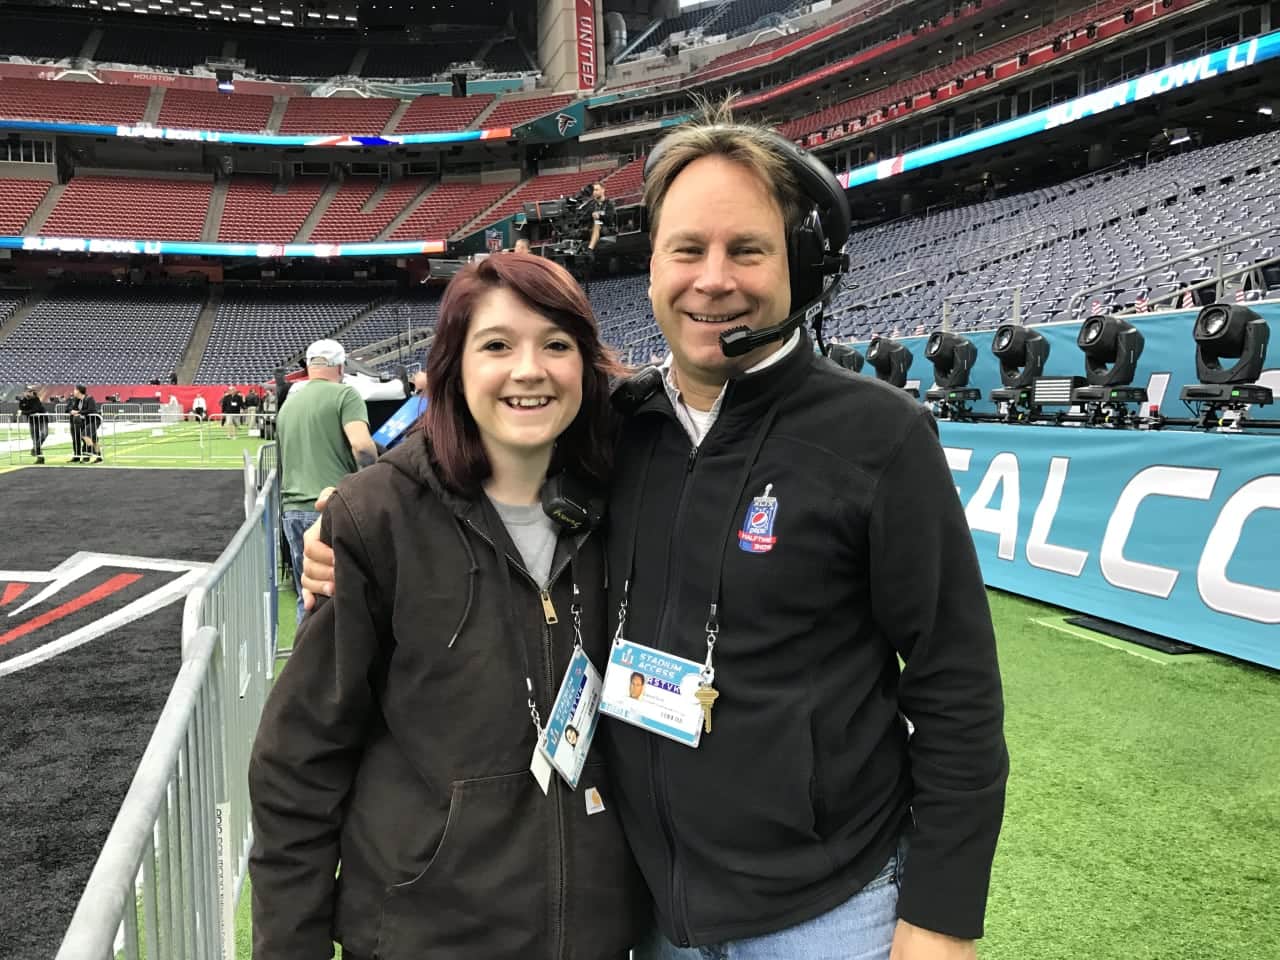 Design Tech student Megan Seibel, left, with Purchase College Professor Dave Grill at the Super Bowl.